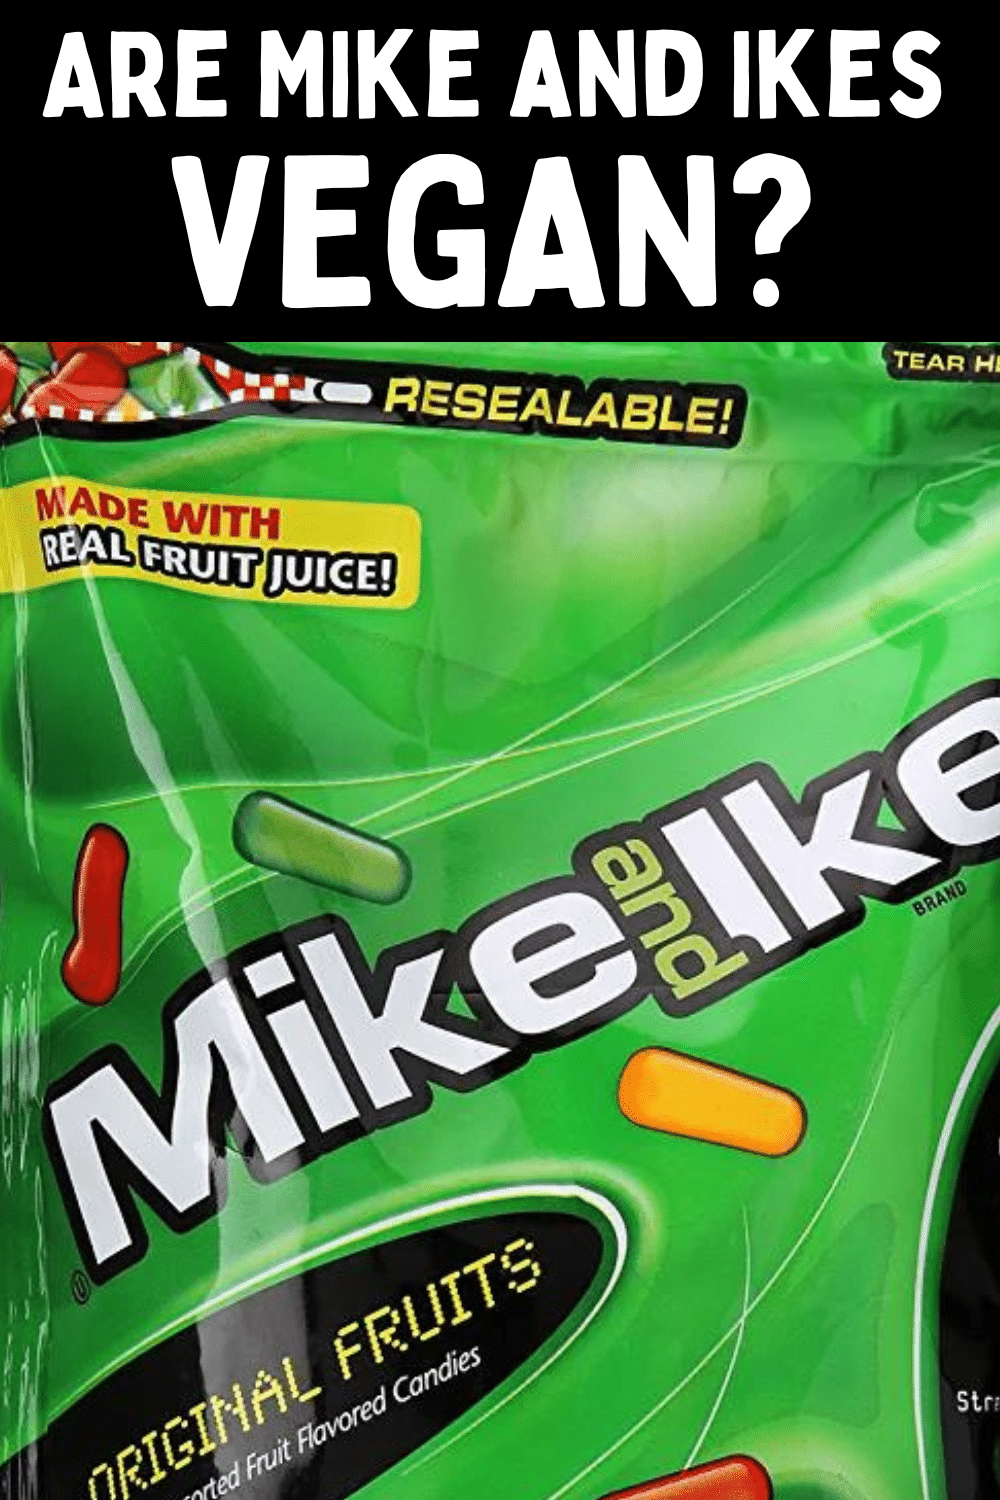 Green bag of MIke and Ikes with text overlay: are mike and ikes vegan?